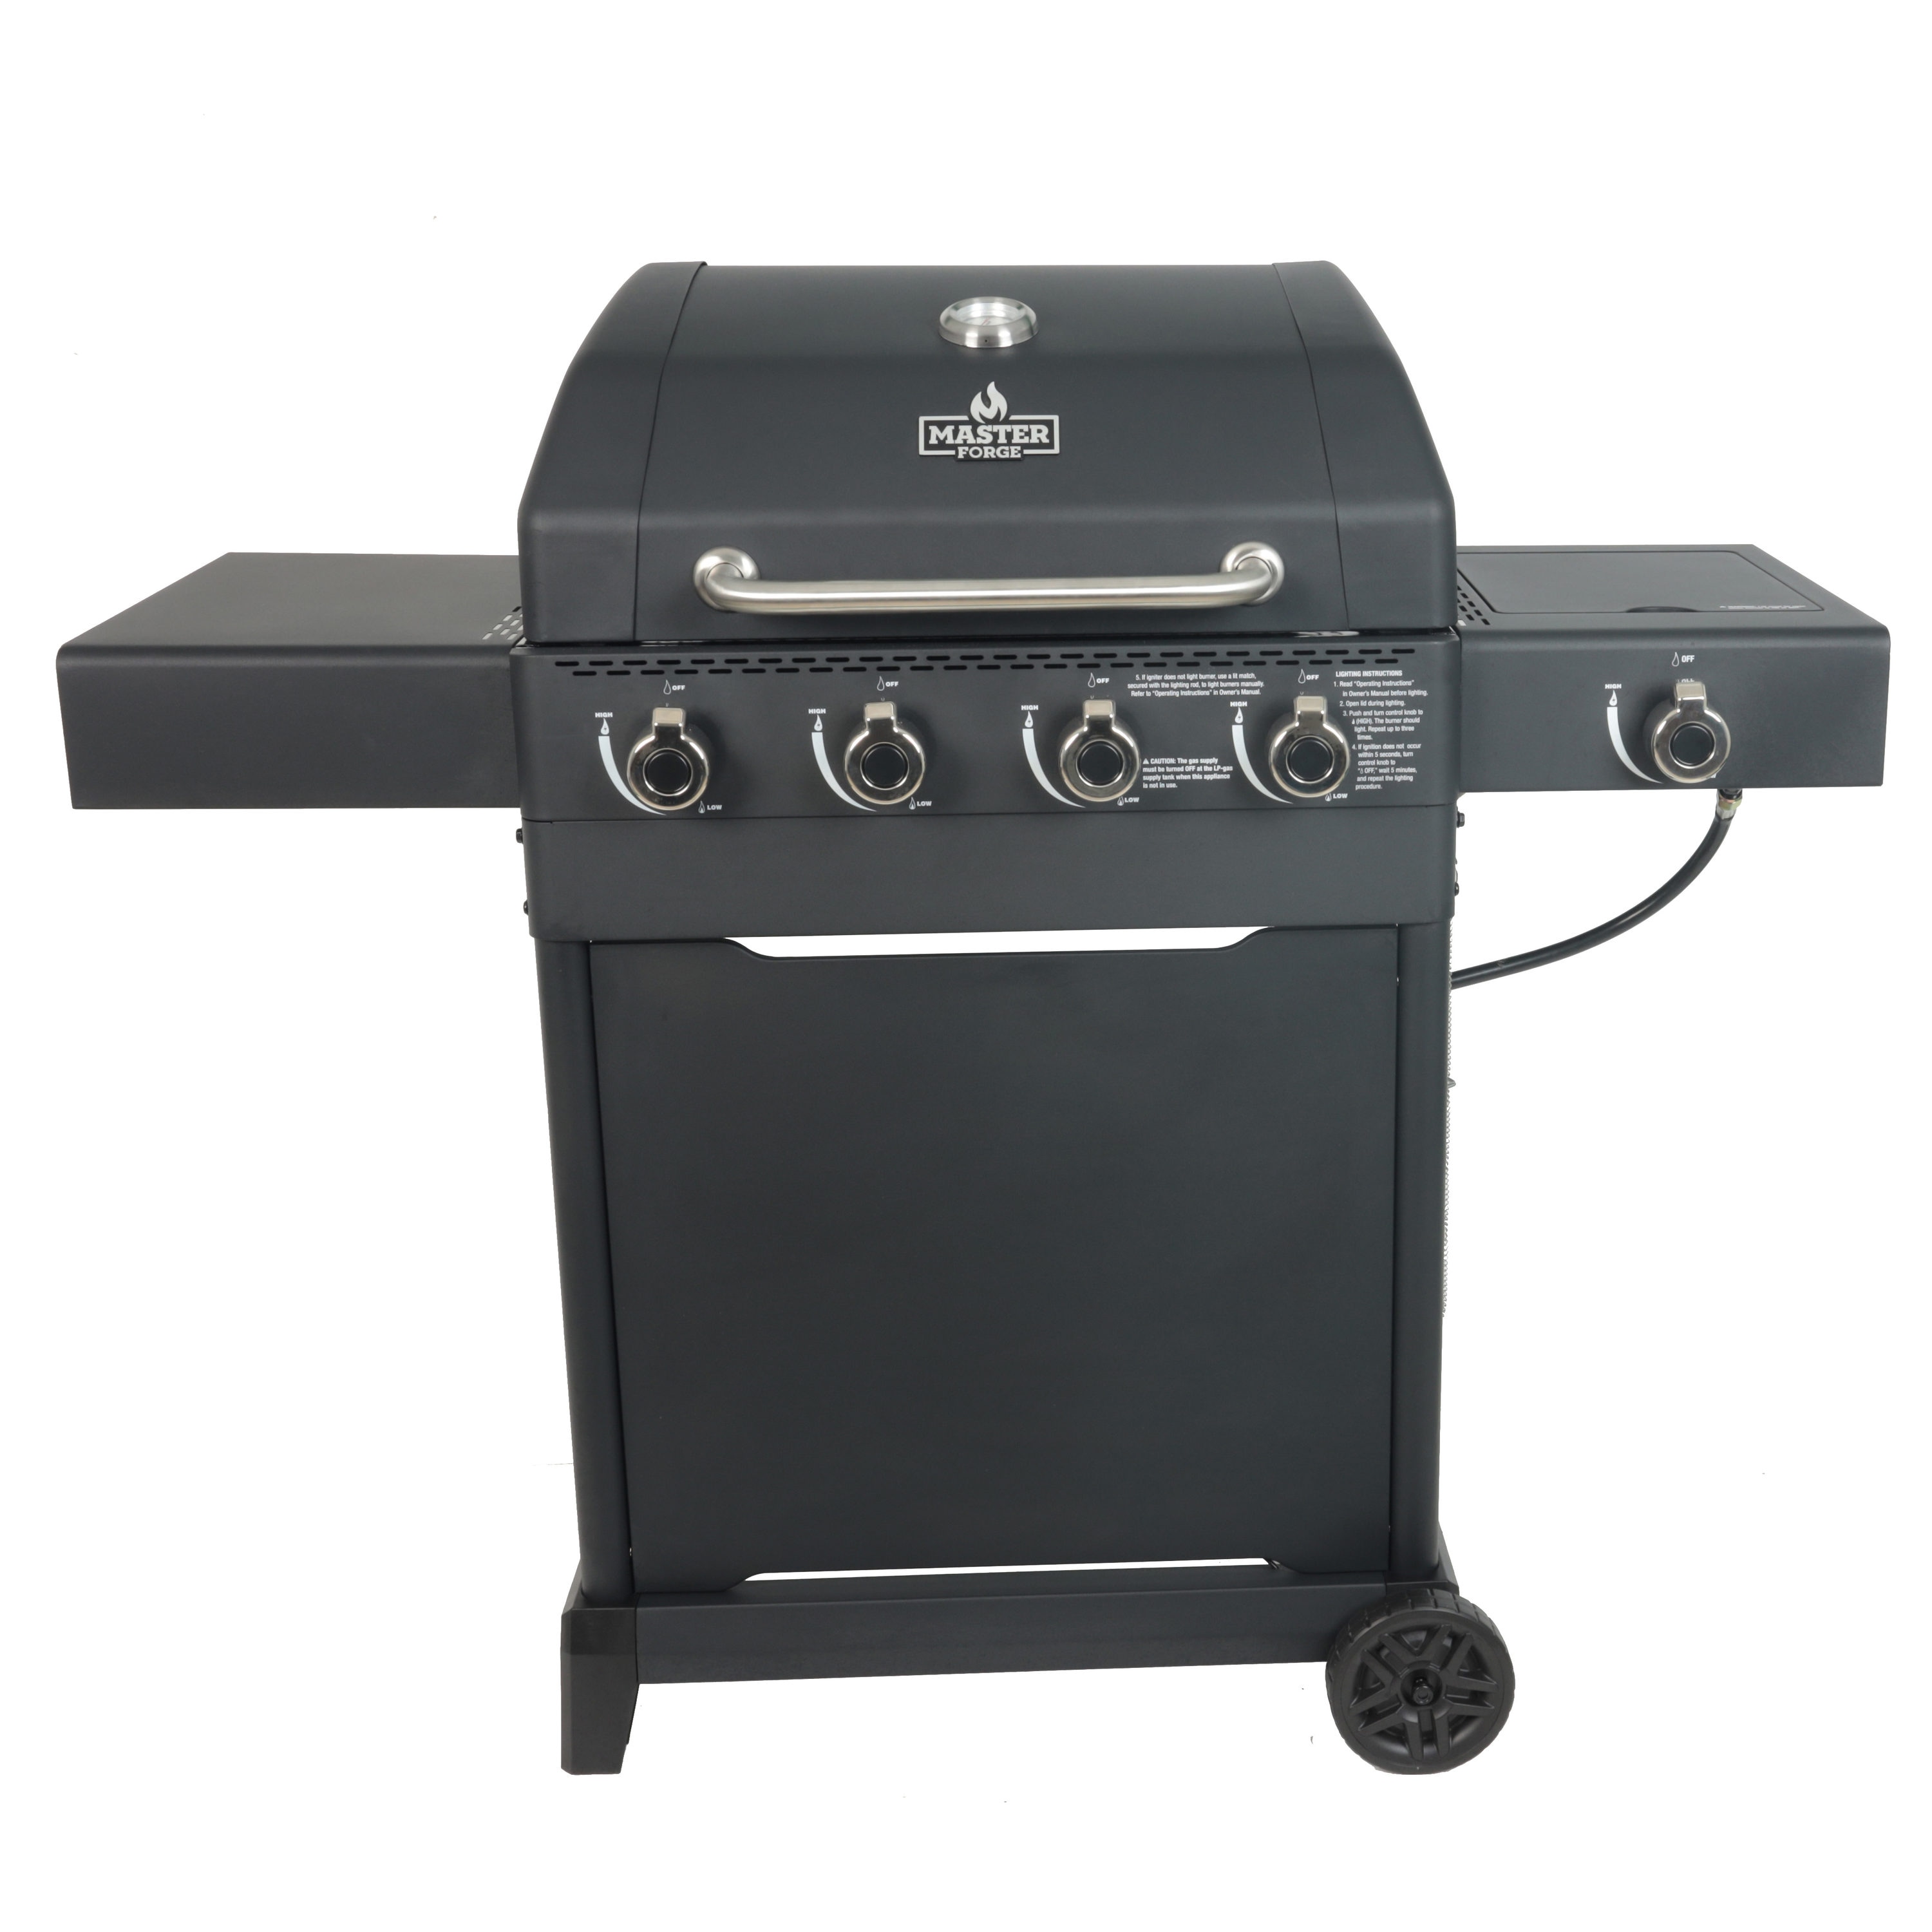 Master Forge Black/Powder Coated 4-Burner Liquid Propane Gas Grill with Side Burner in the Gas Grills at Lowes.com